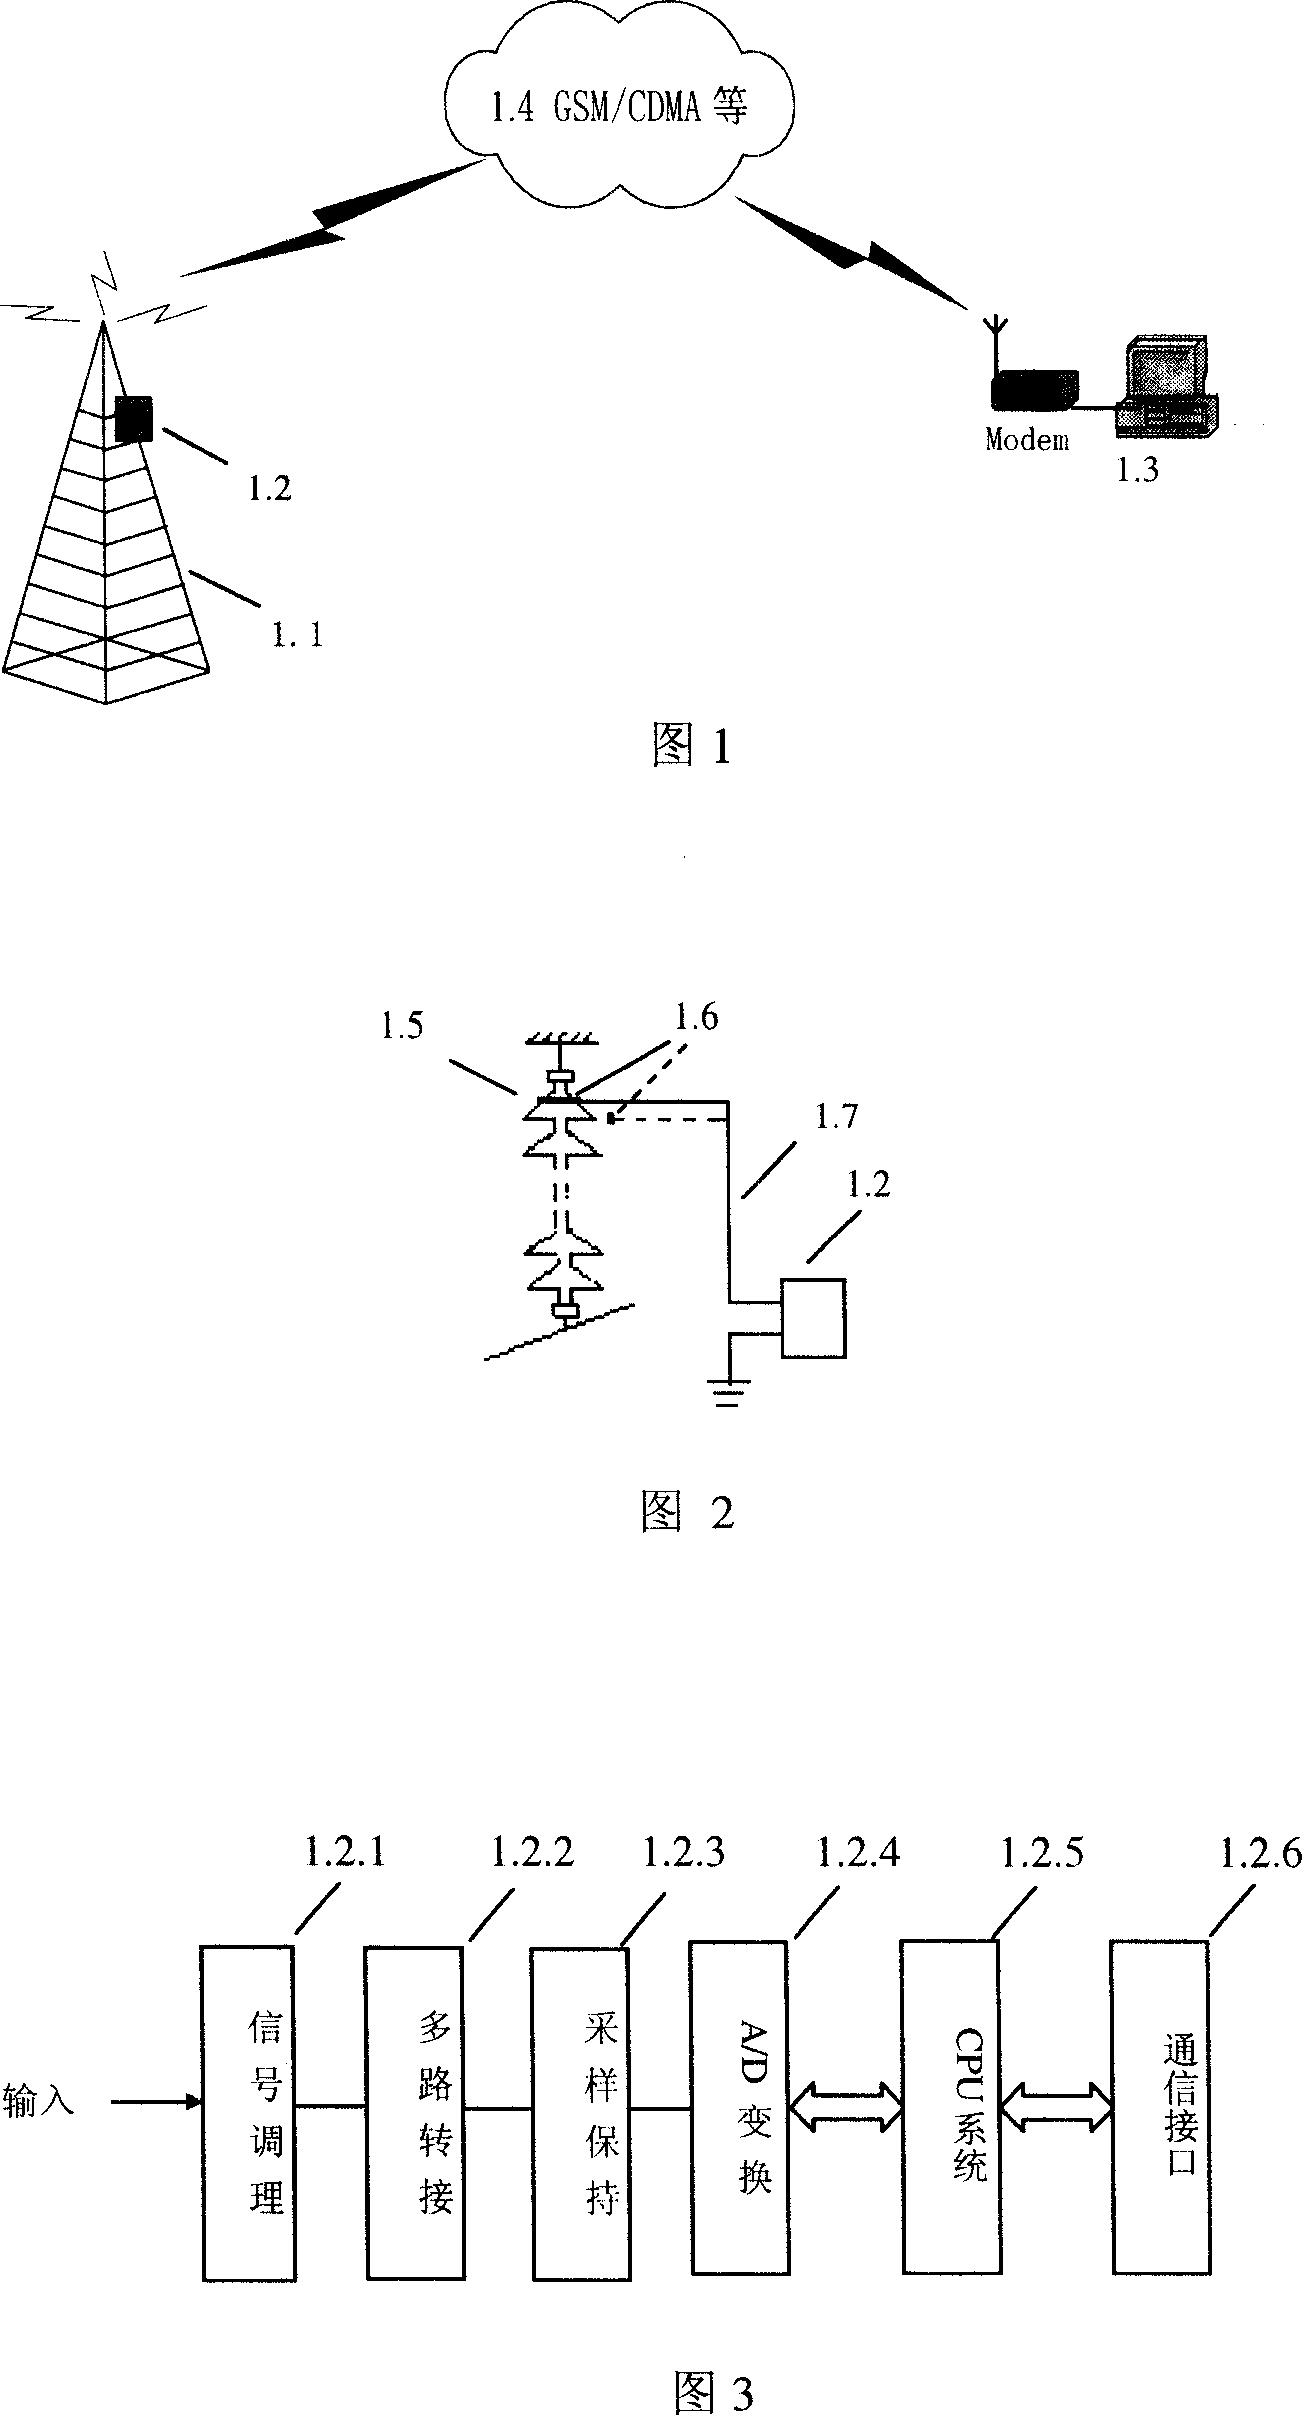 On-line monitoring system method for overhead line by potential method